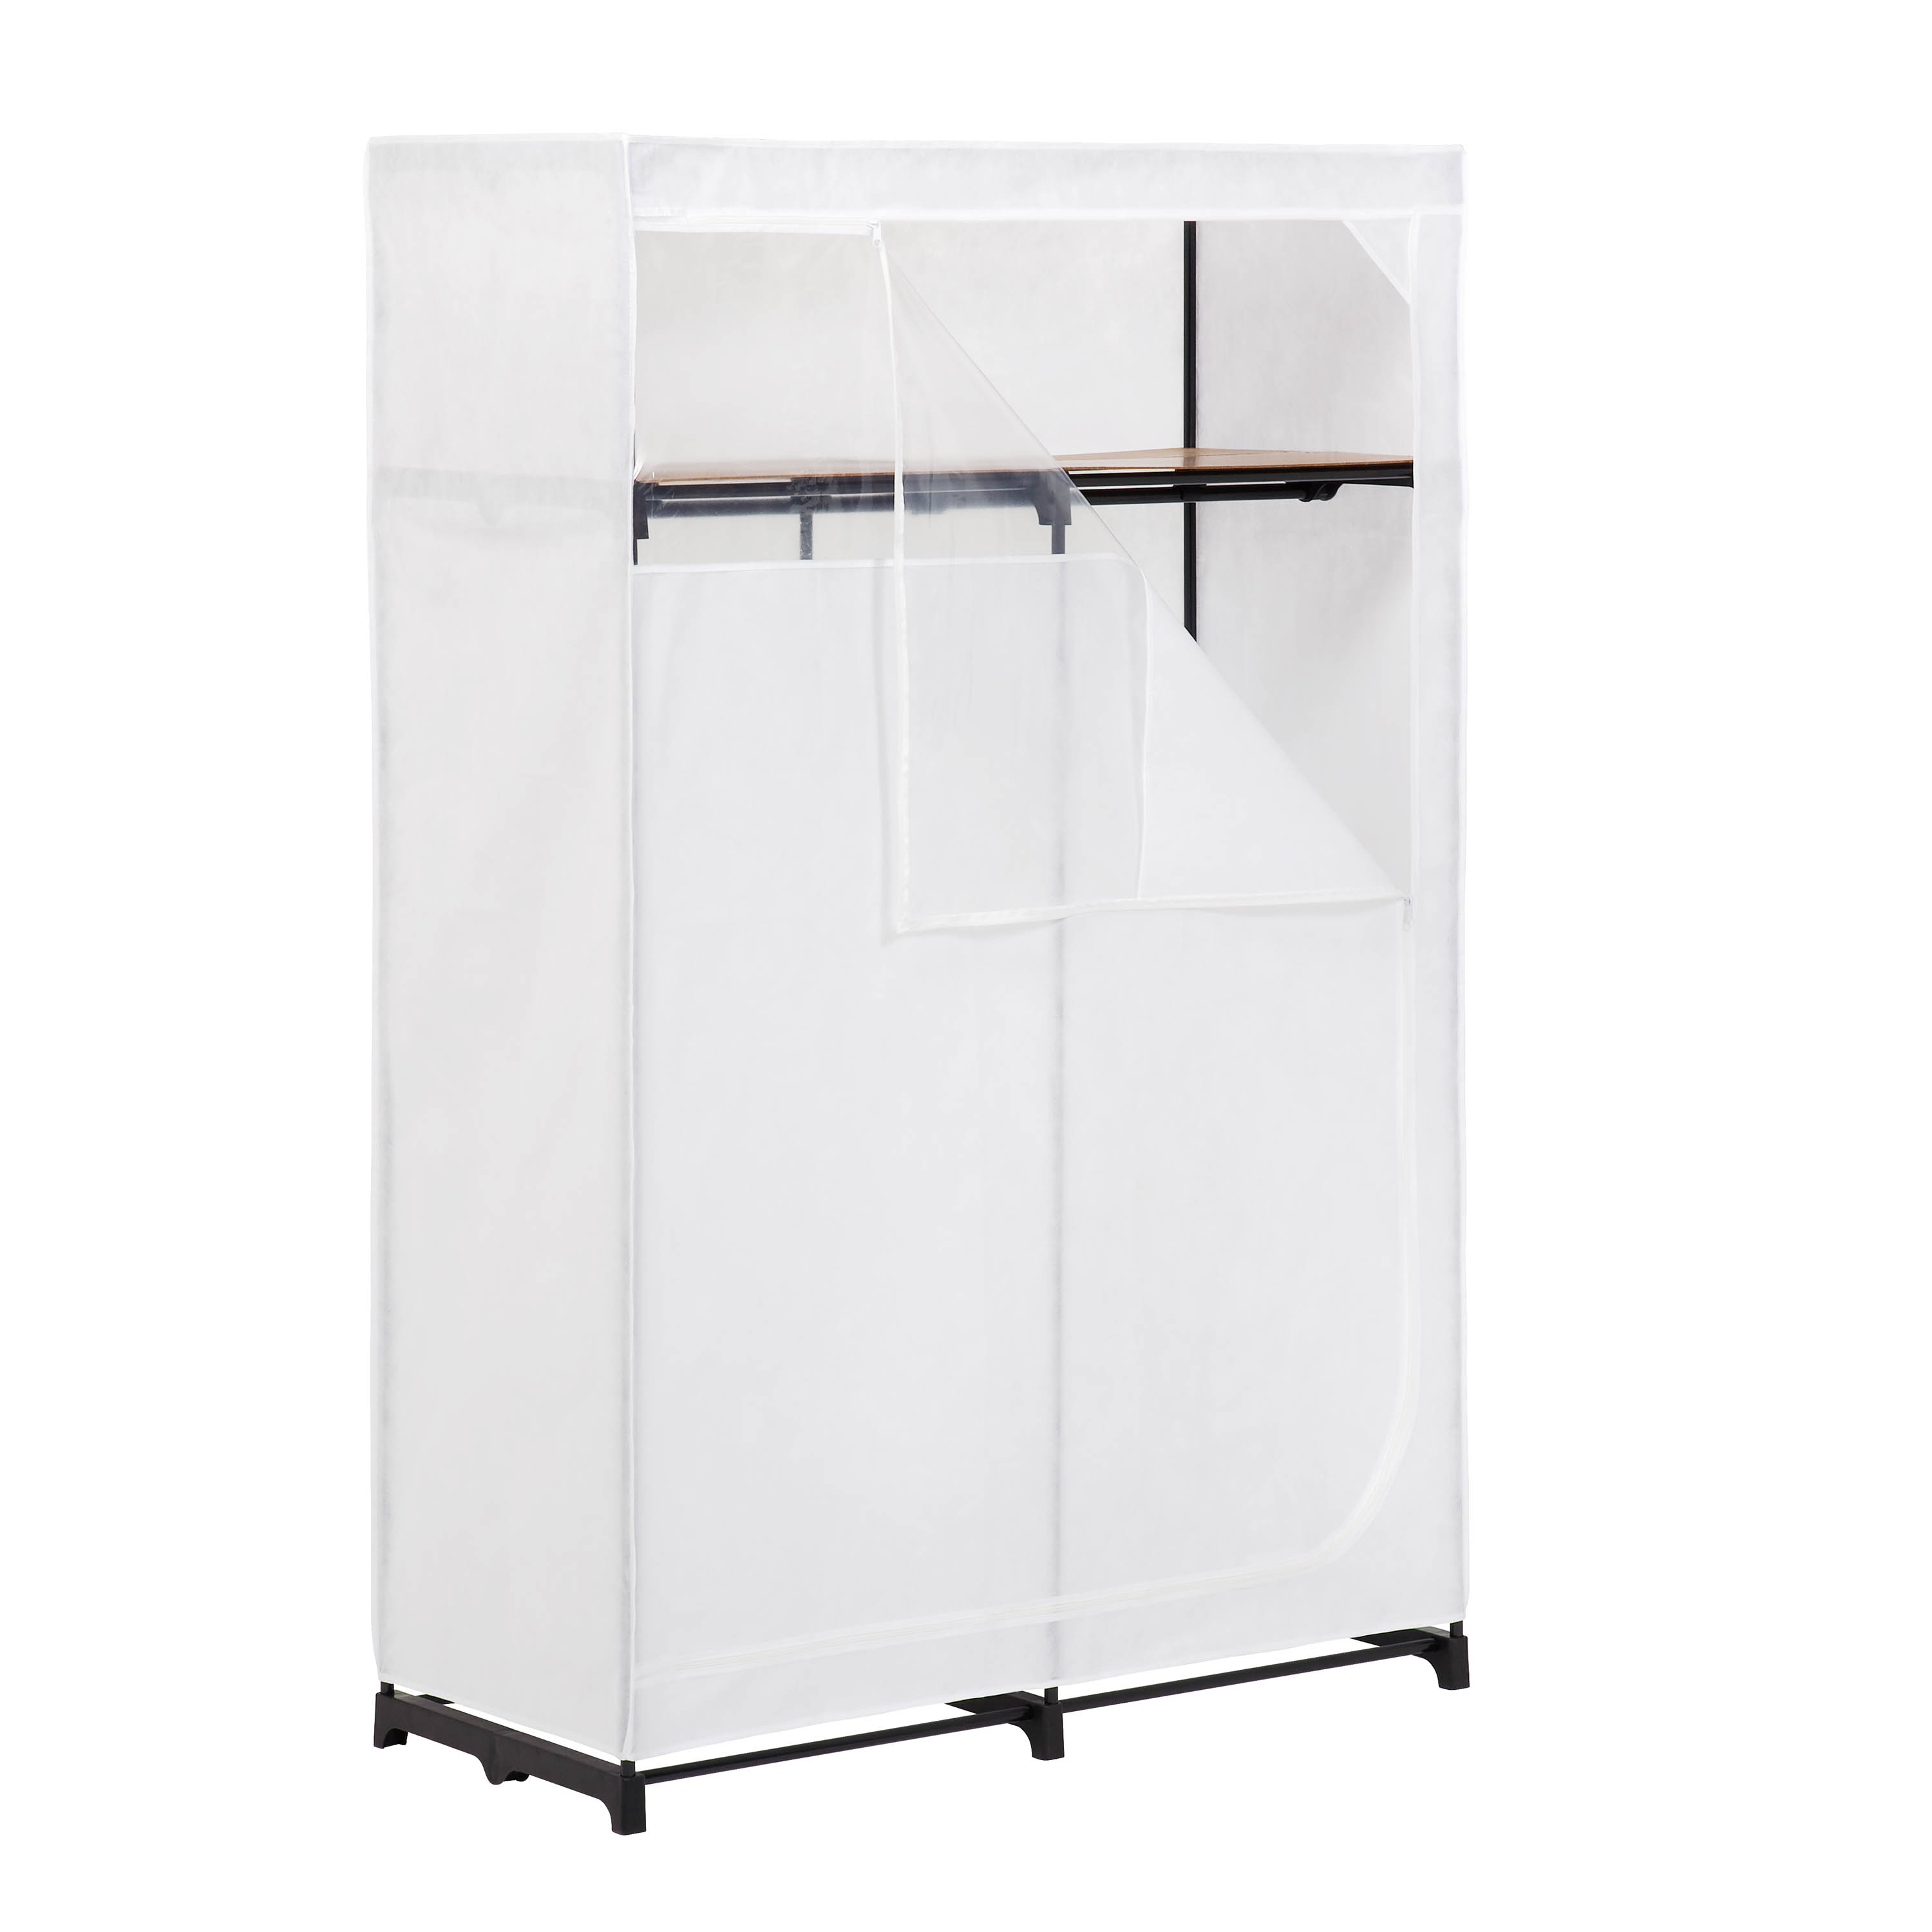 Honey Can Do 46 In Wardrobe With Top Shelf, White - image 1 of 3